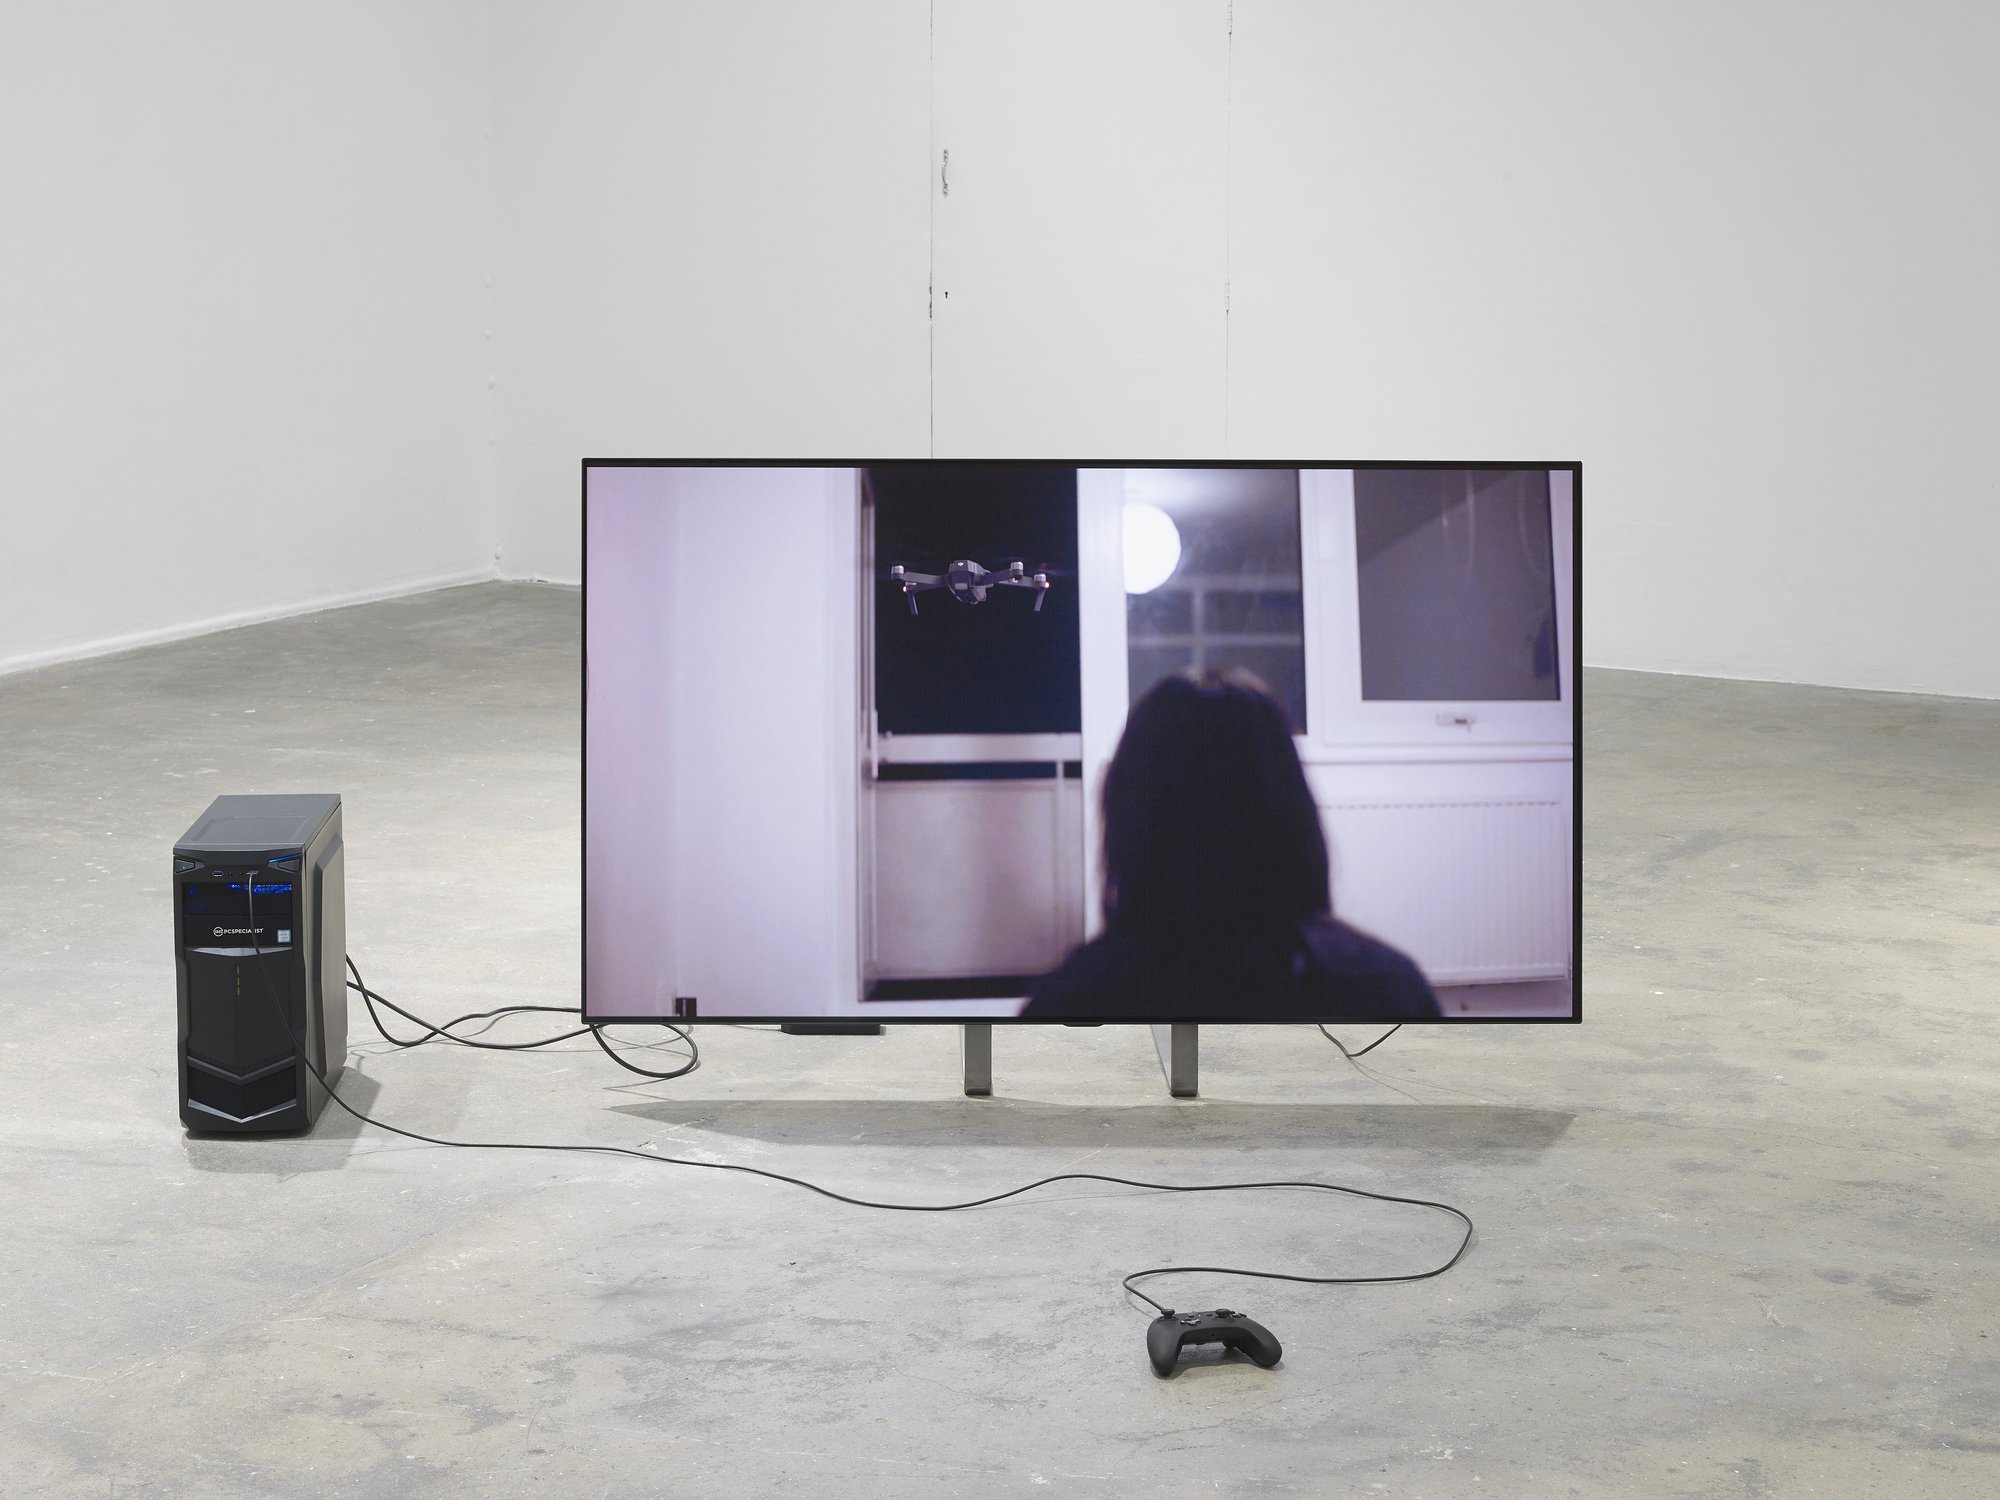 Sidsel Meineche Hansen, End-Used City, computer‐generated images, game controller, PC, video, sound, 12 min., 2019